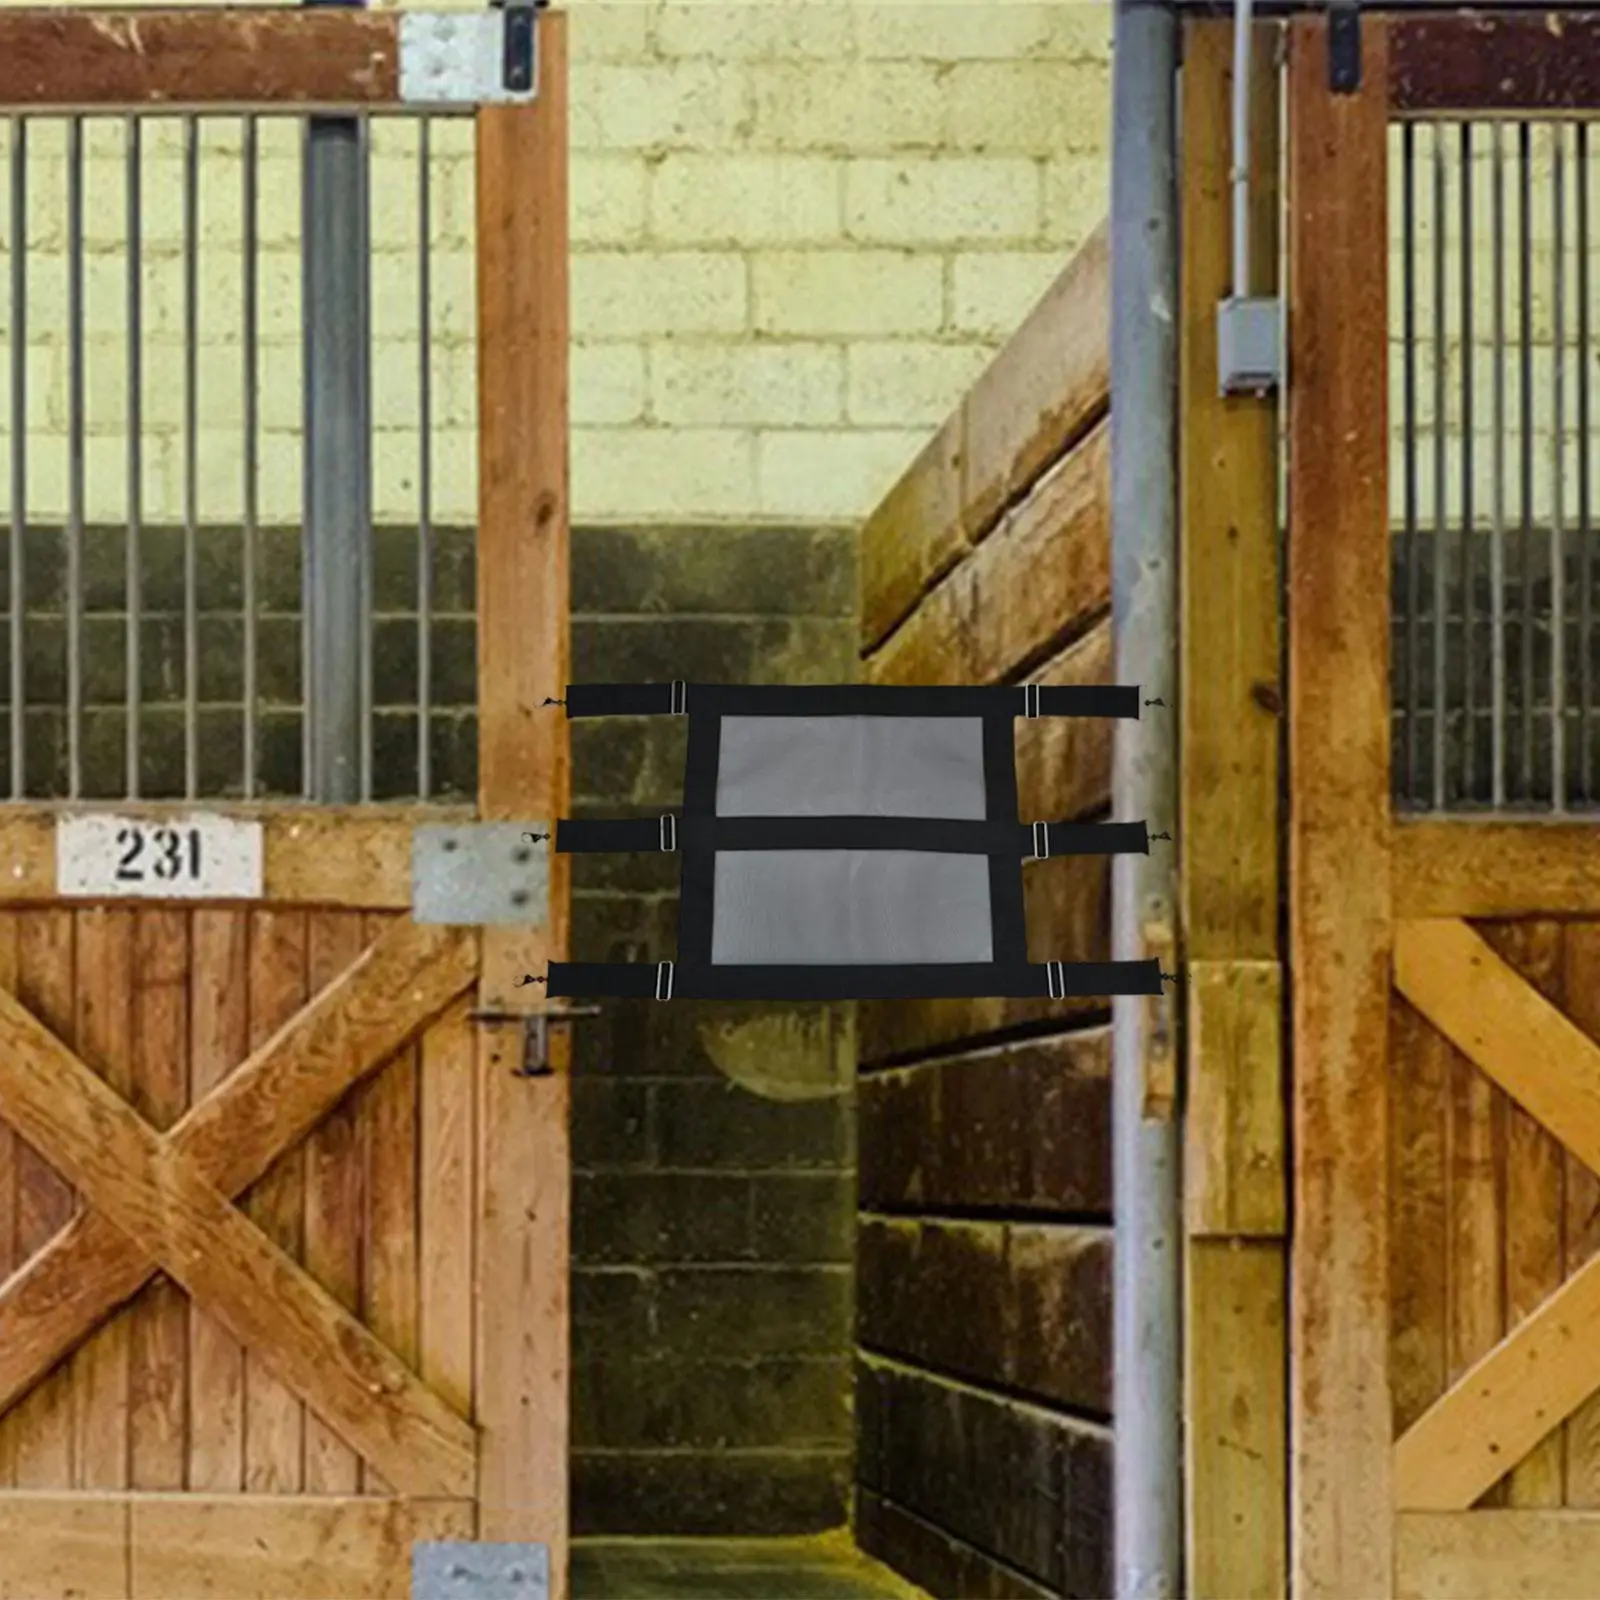 Horse Stall guard for Horses Allows Air Flow Heavy Duty Extra Wide with Sturdy